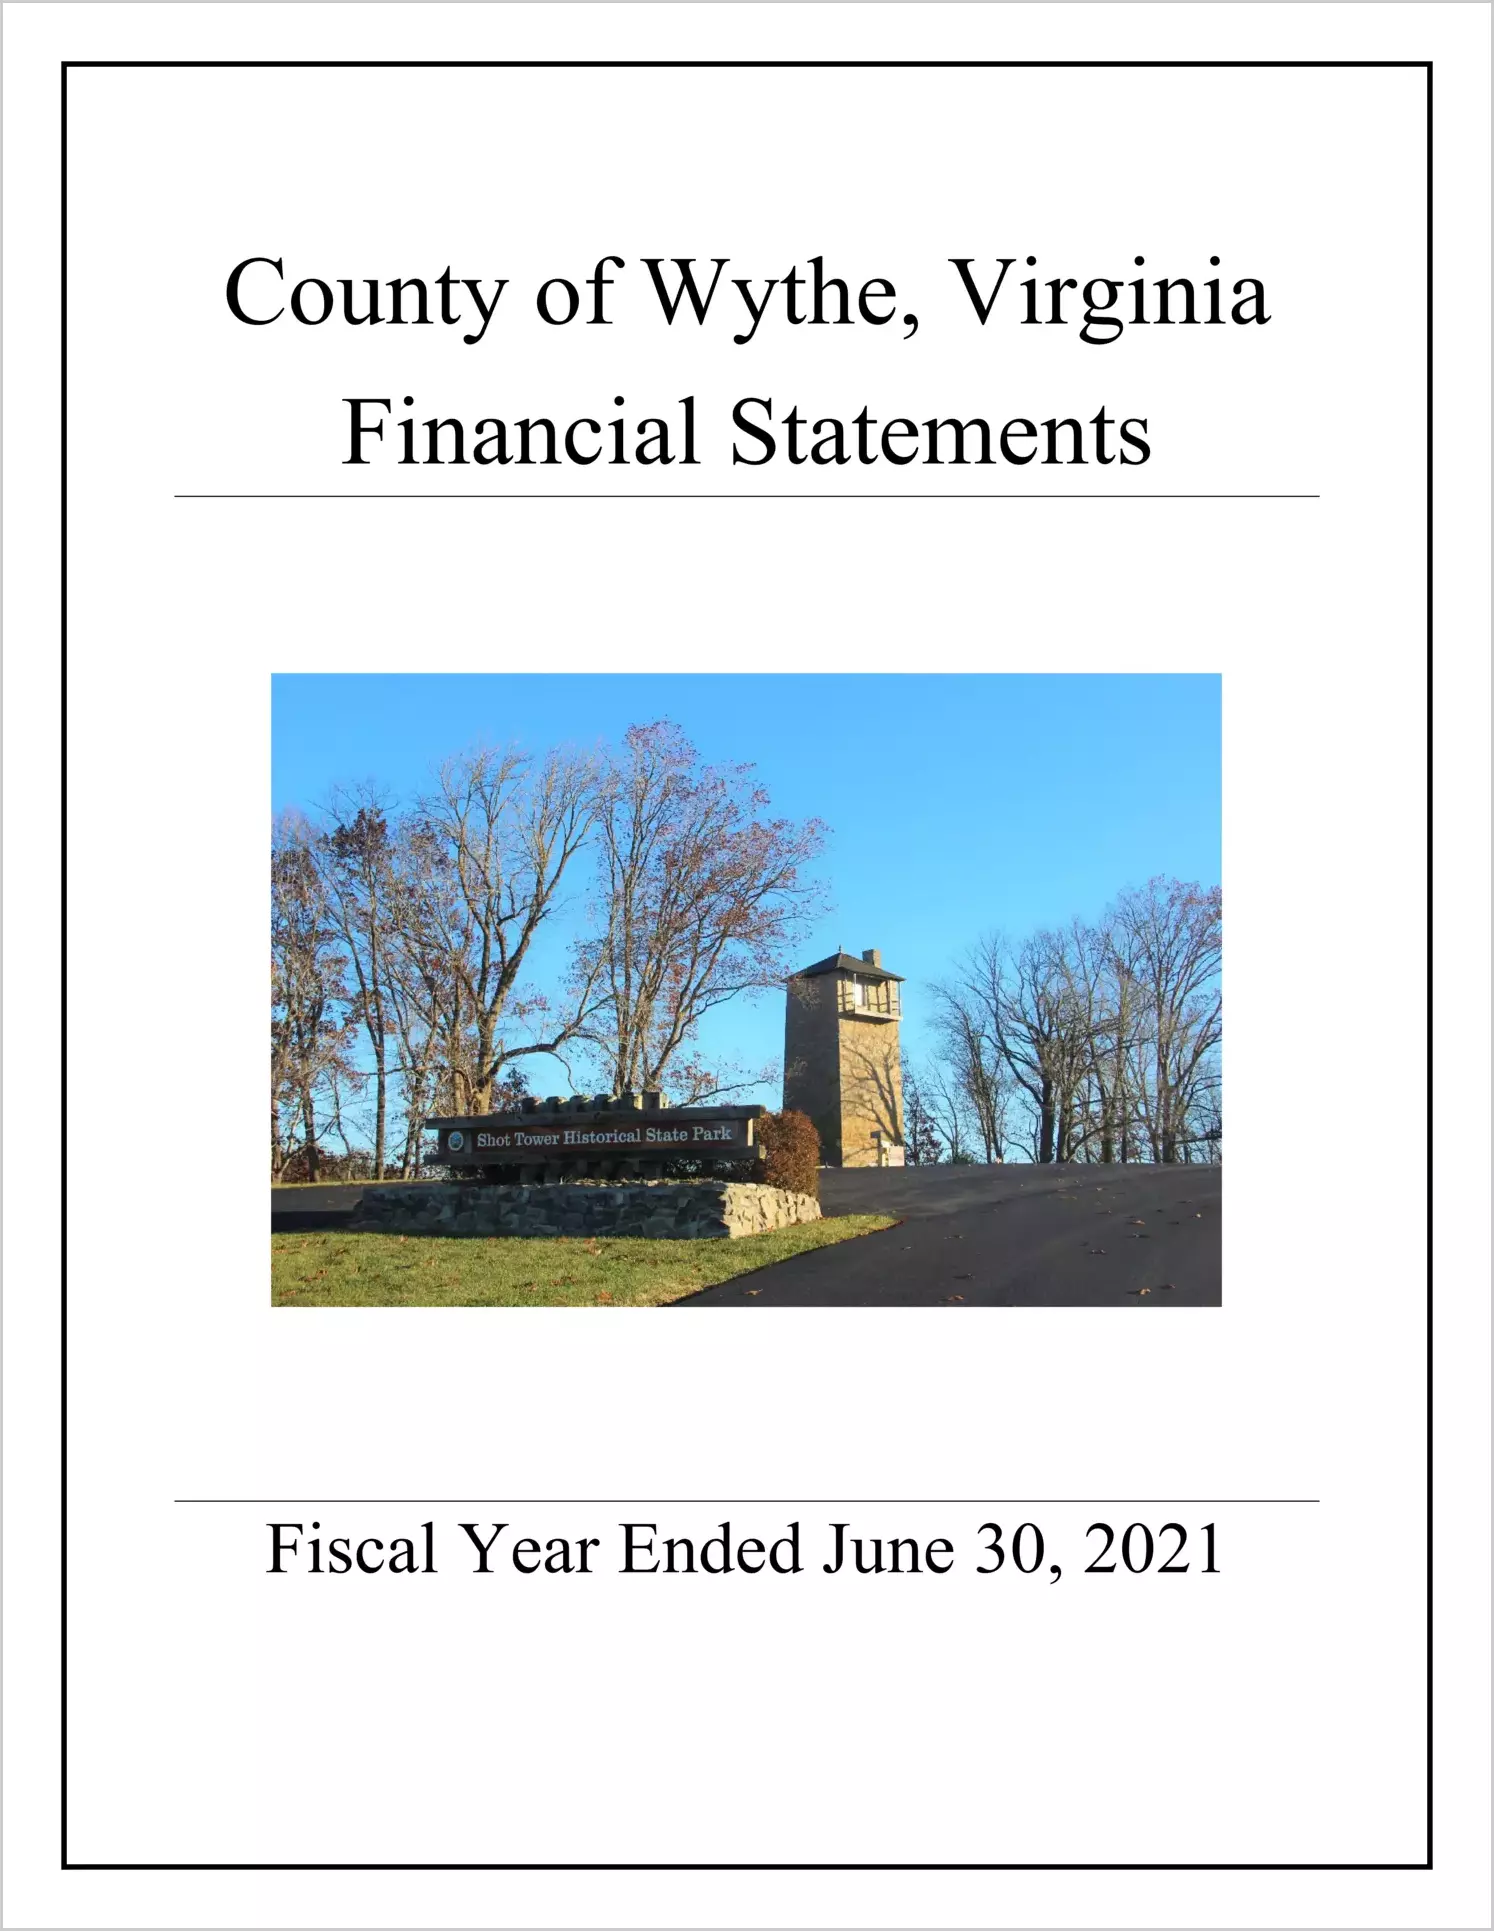 2021 Annual Financial Report for County of Wythe